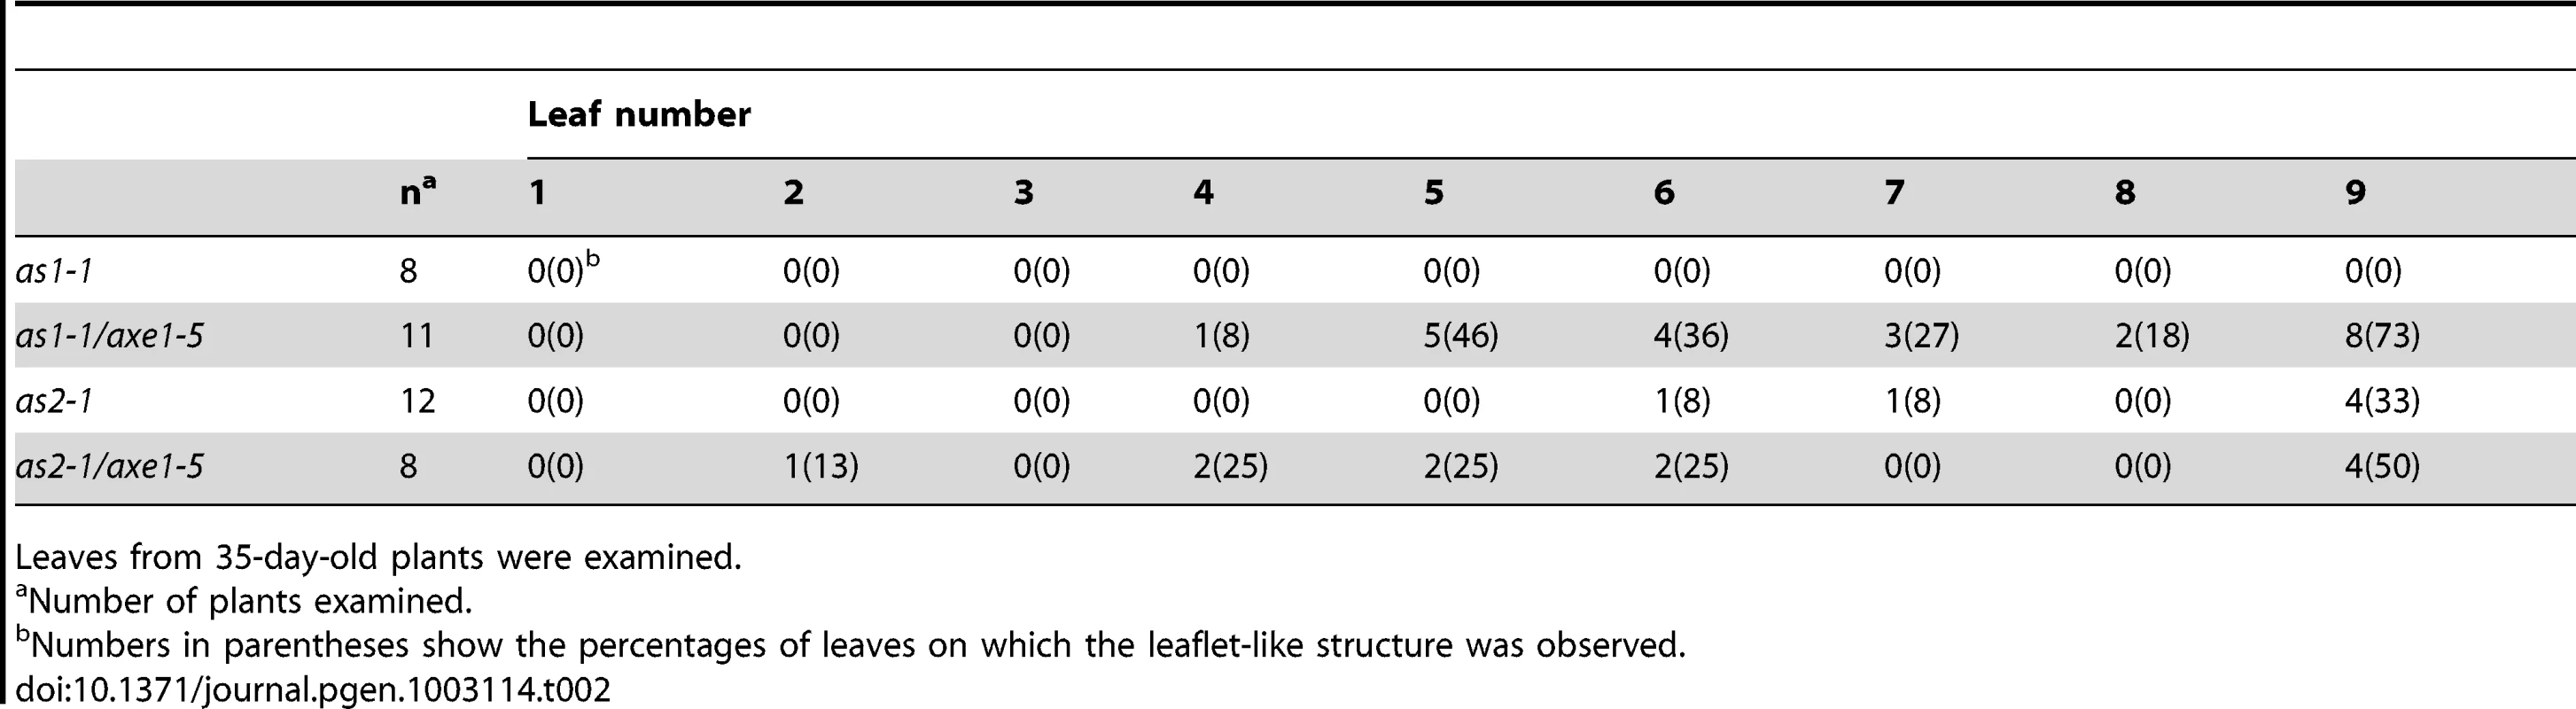 Frequency of leaflet-like structure.